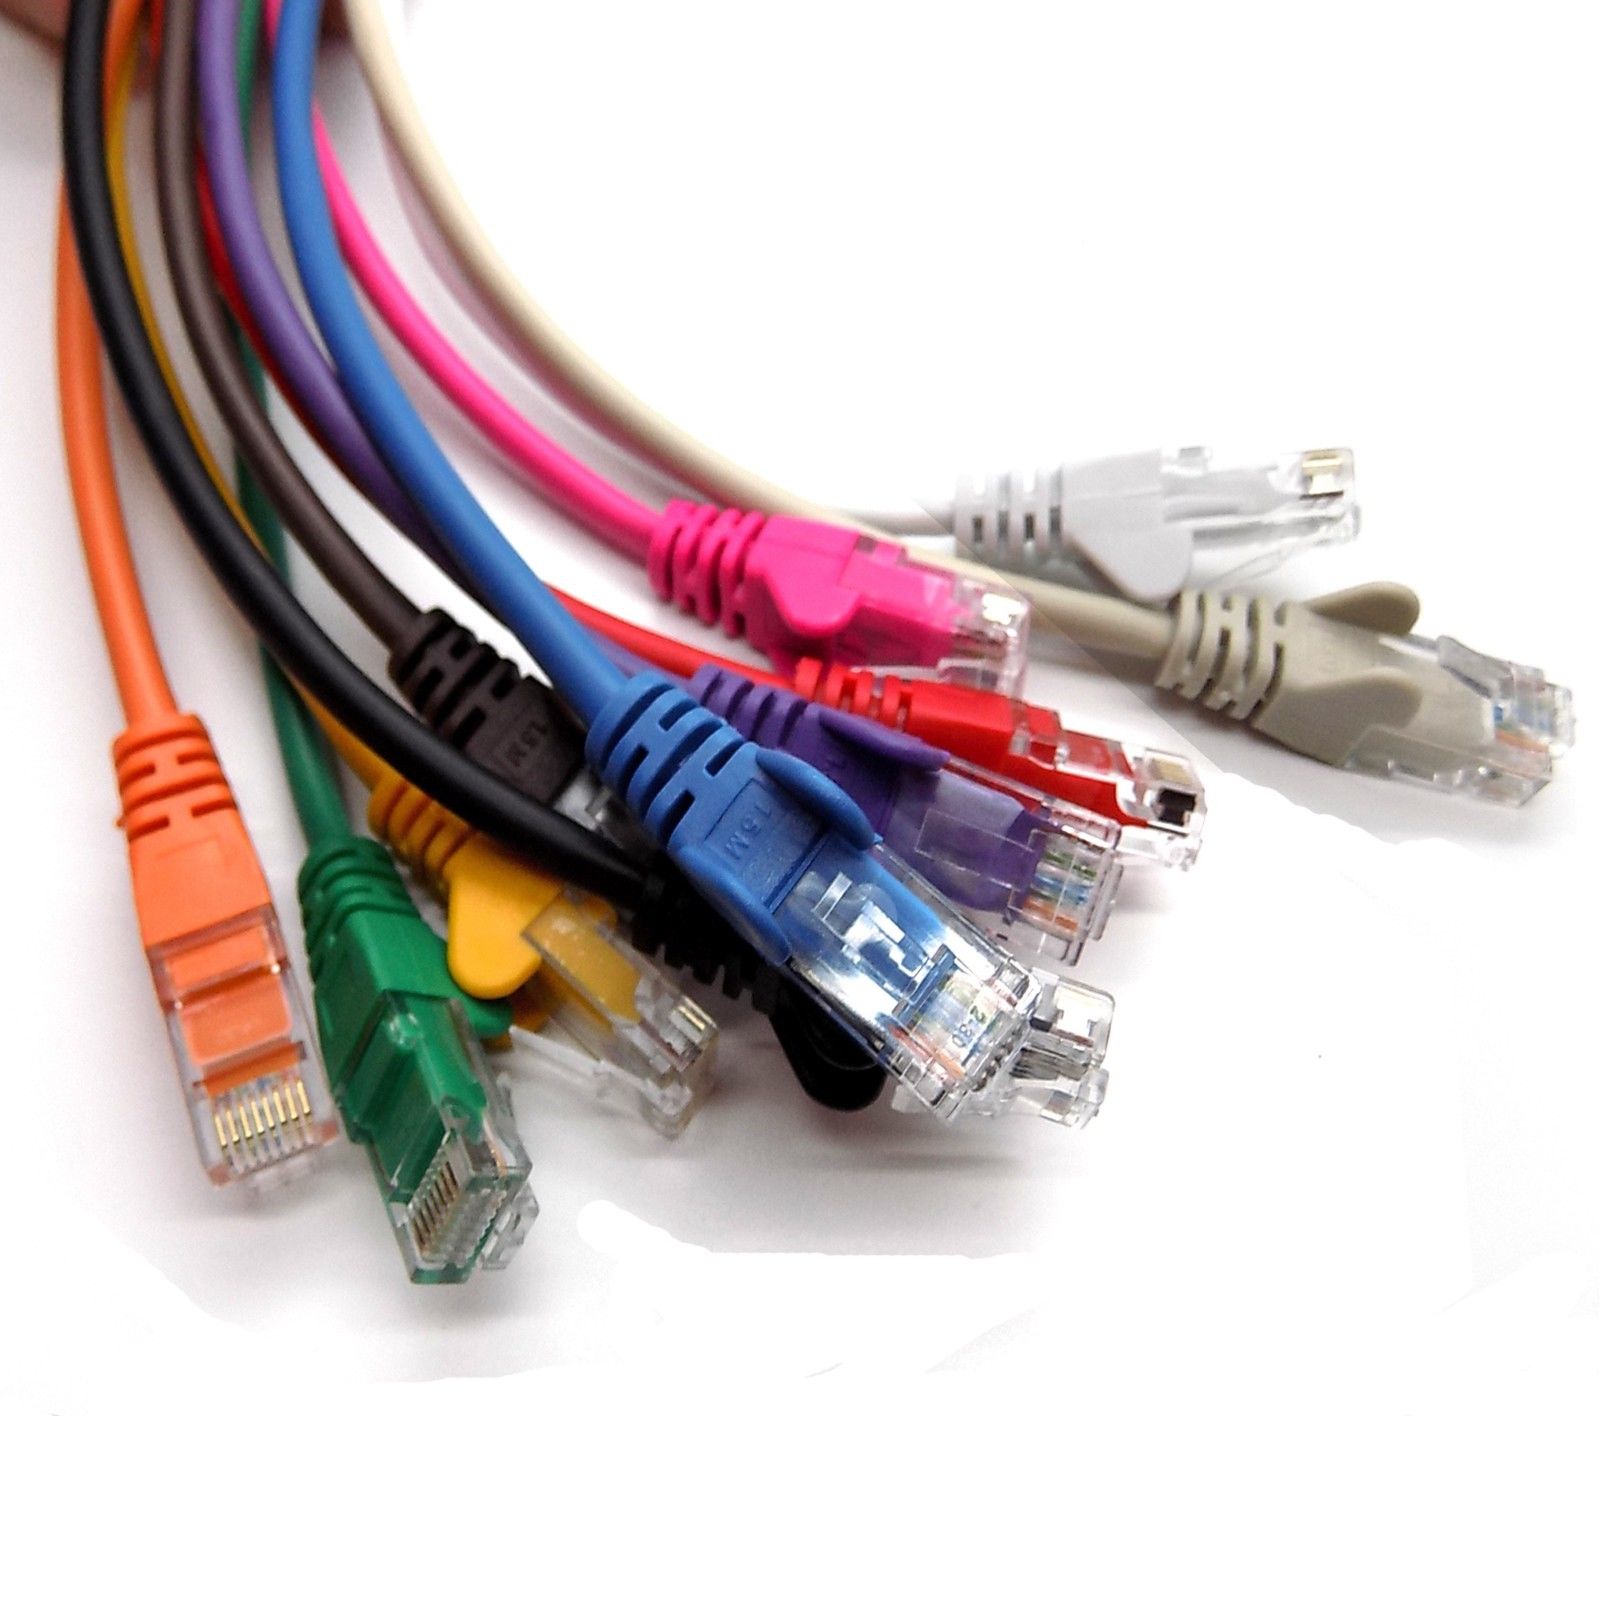 Choosing the right ethernet network cable | by How to choose | Medium